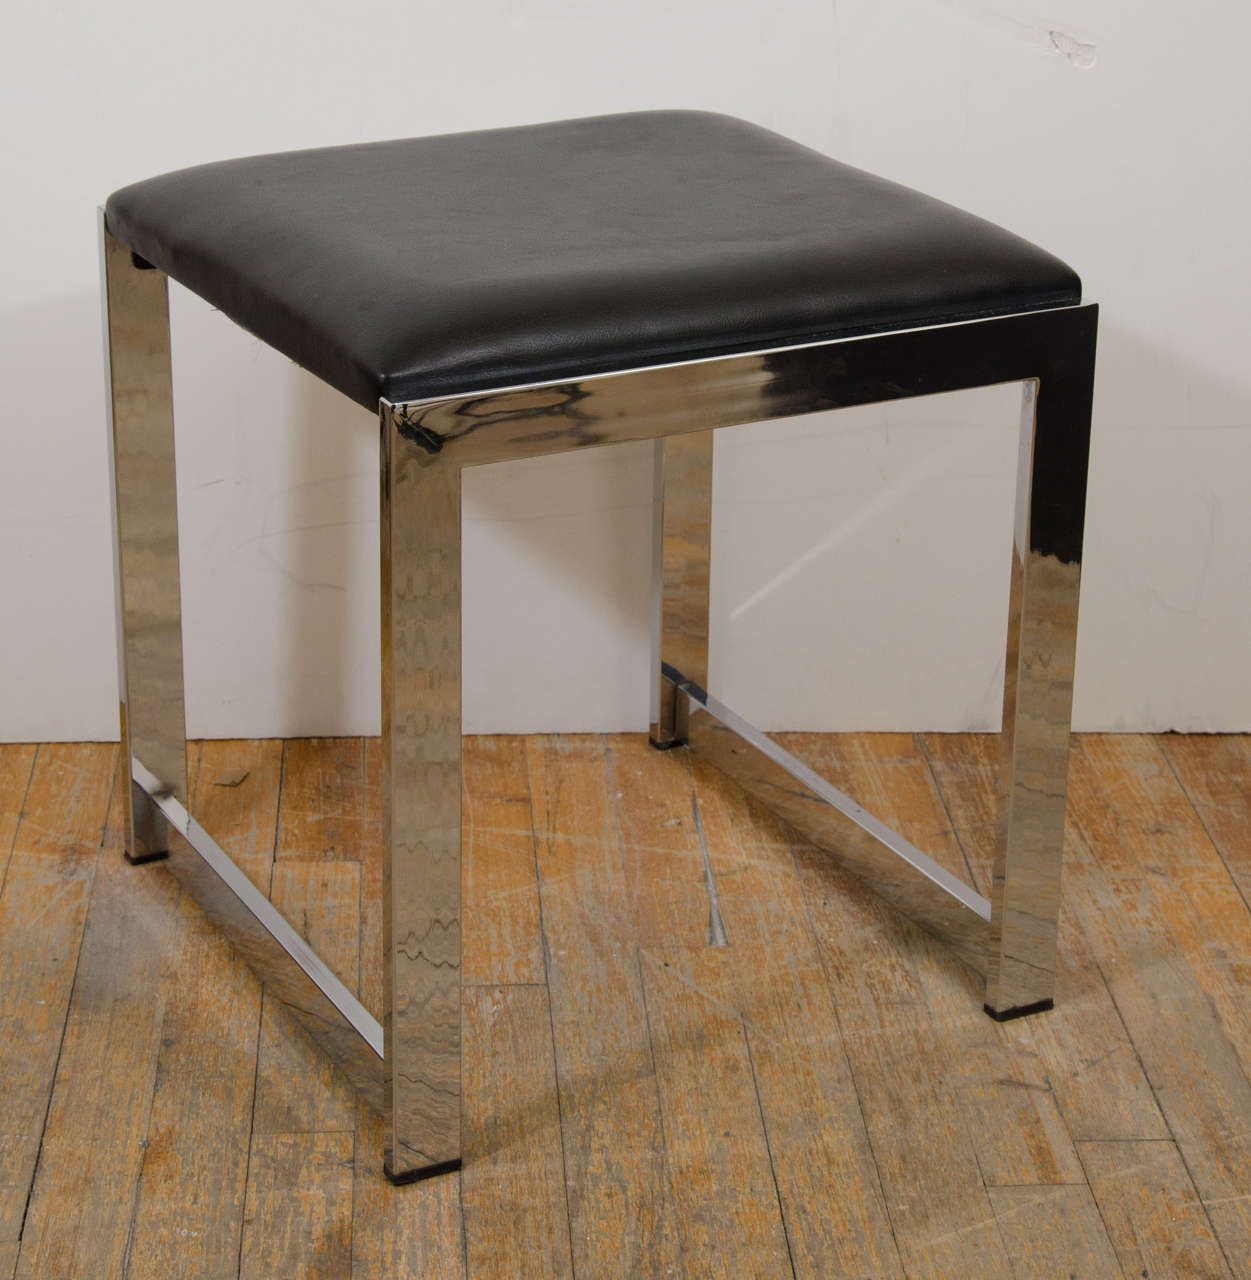 A vintage black vinyl bench or stool with chrome frame

Good vintage condition with age appropriate wear. Some scratches to the chrome.